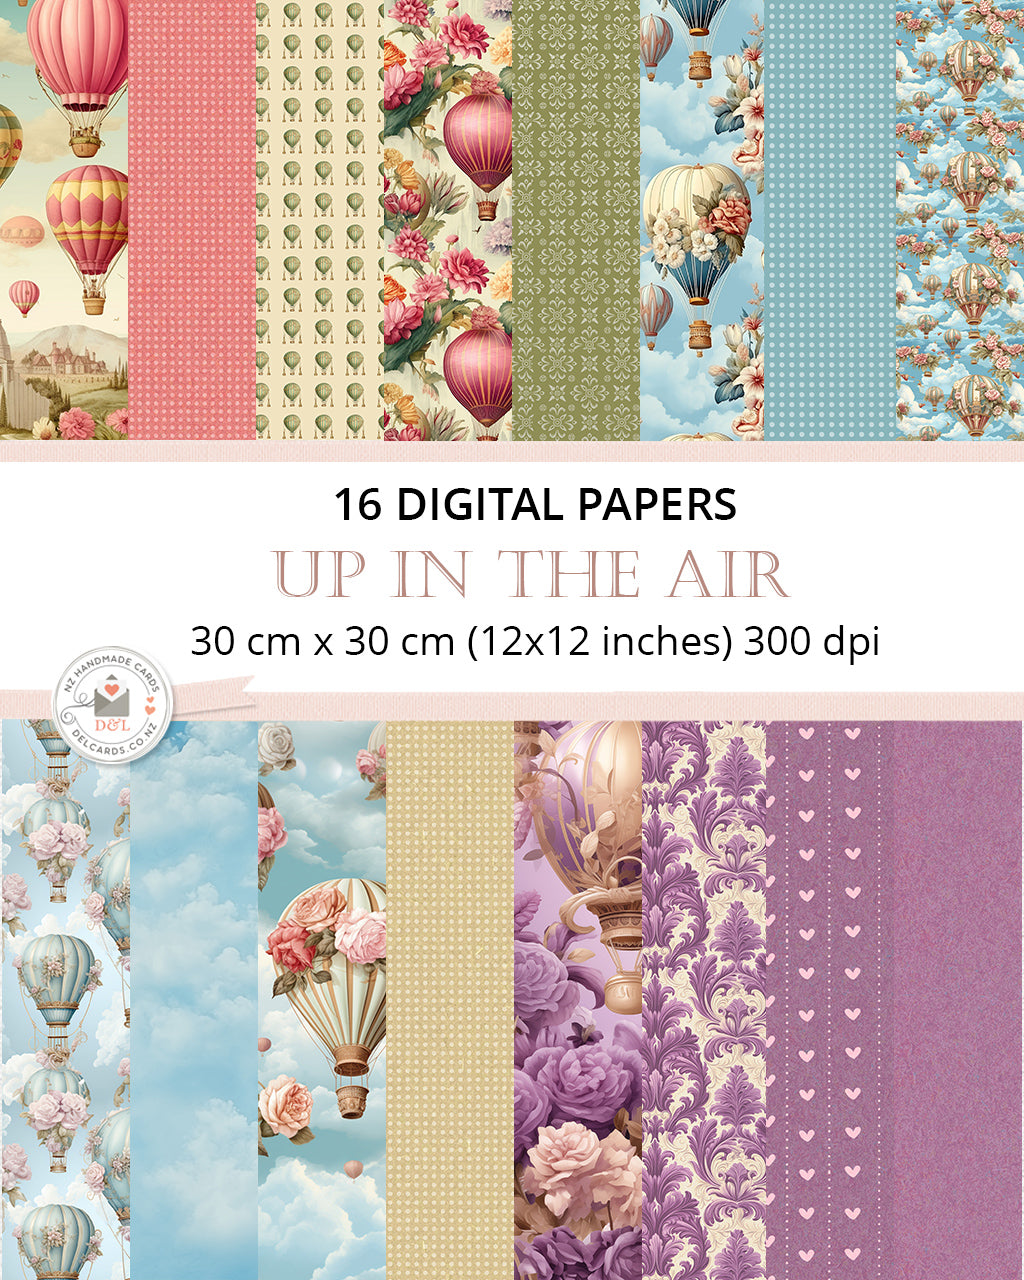 16 Digital Papers - Up in the Air